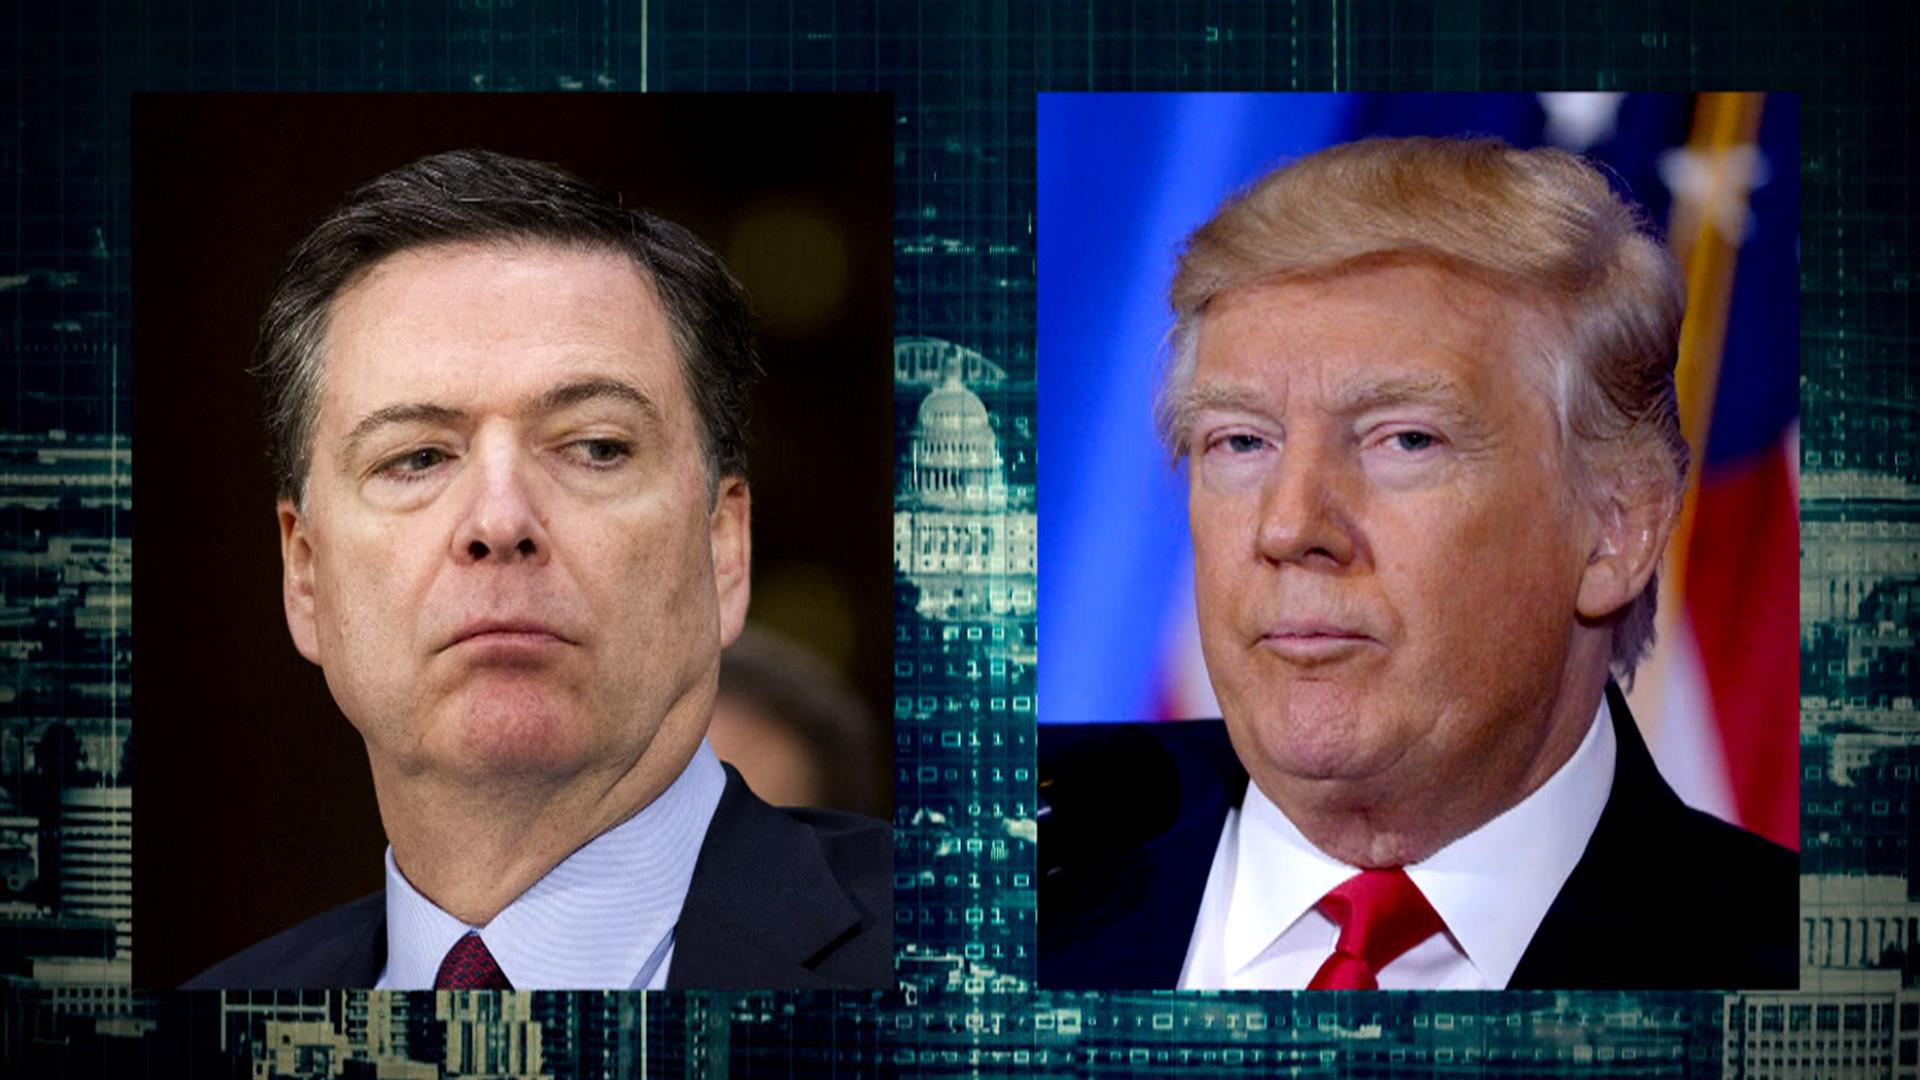 FBI's James Comey personally briefed Trump on Russia report, official says